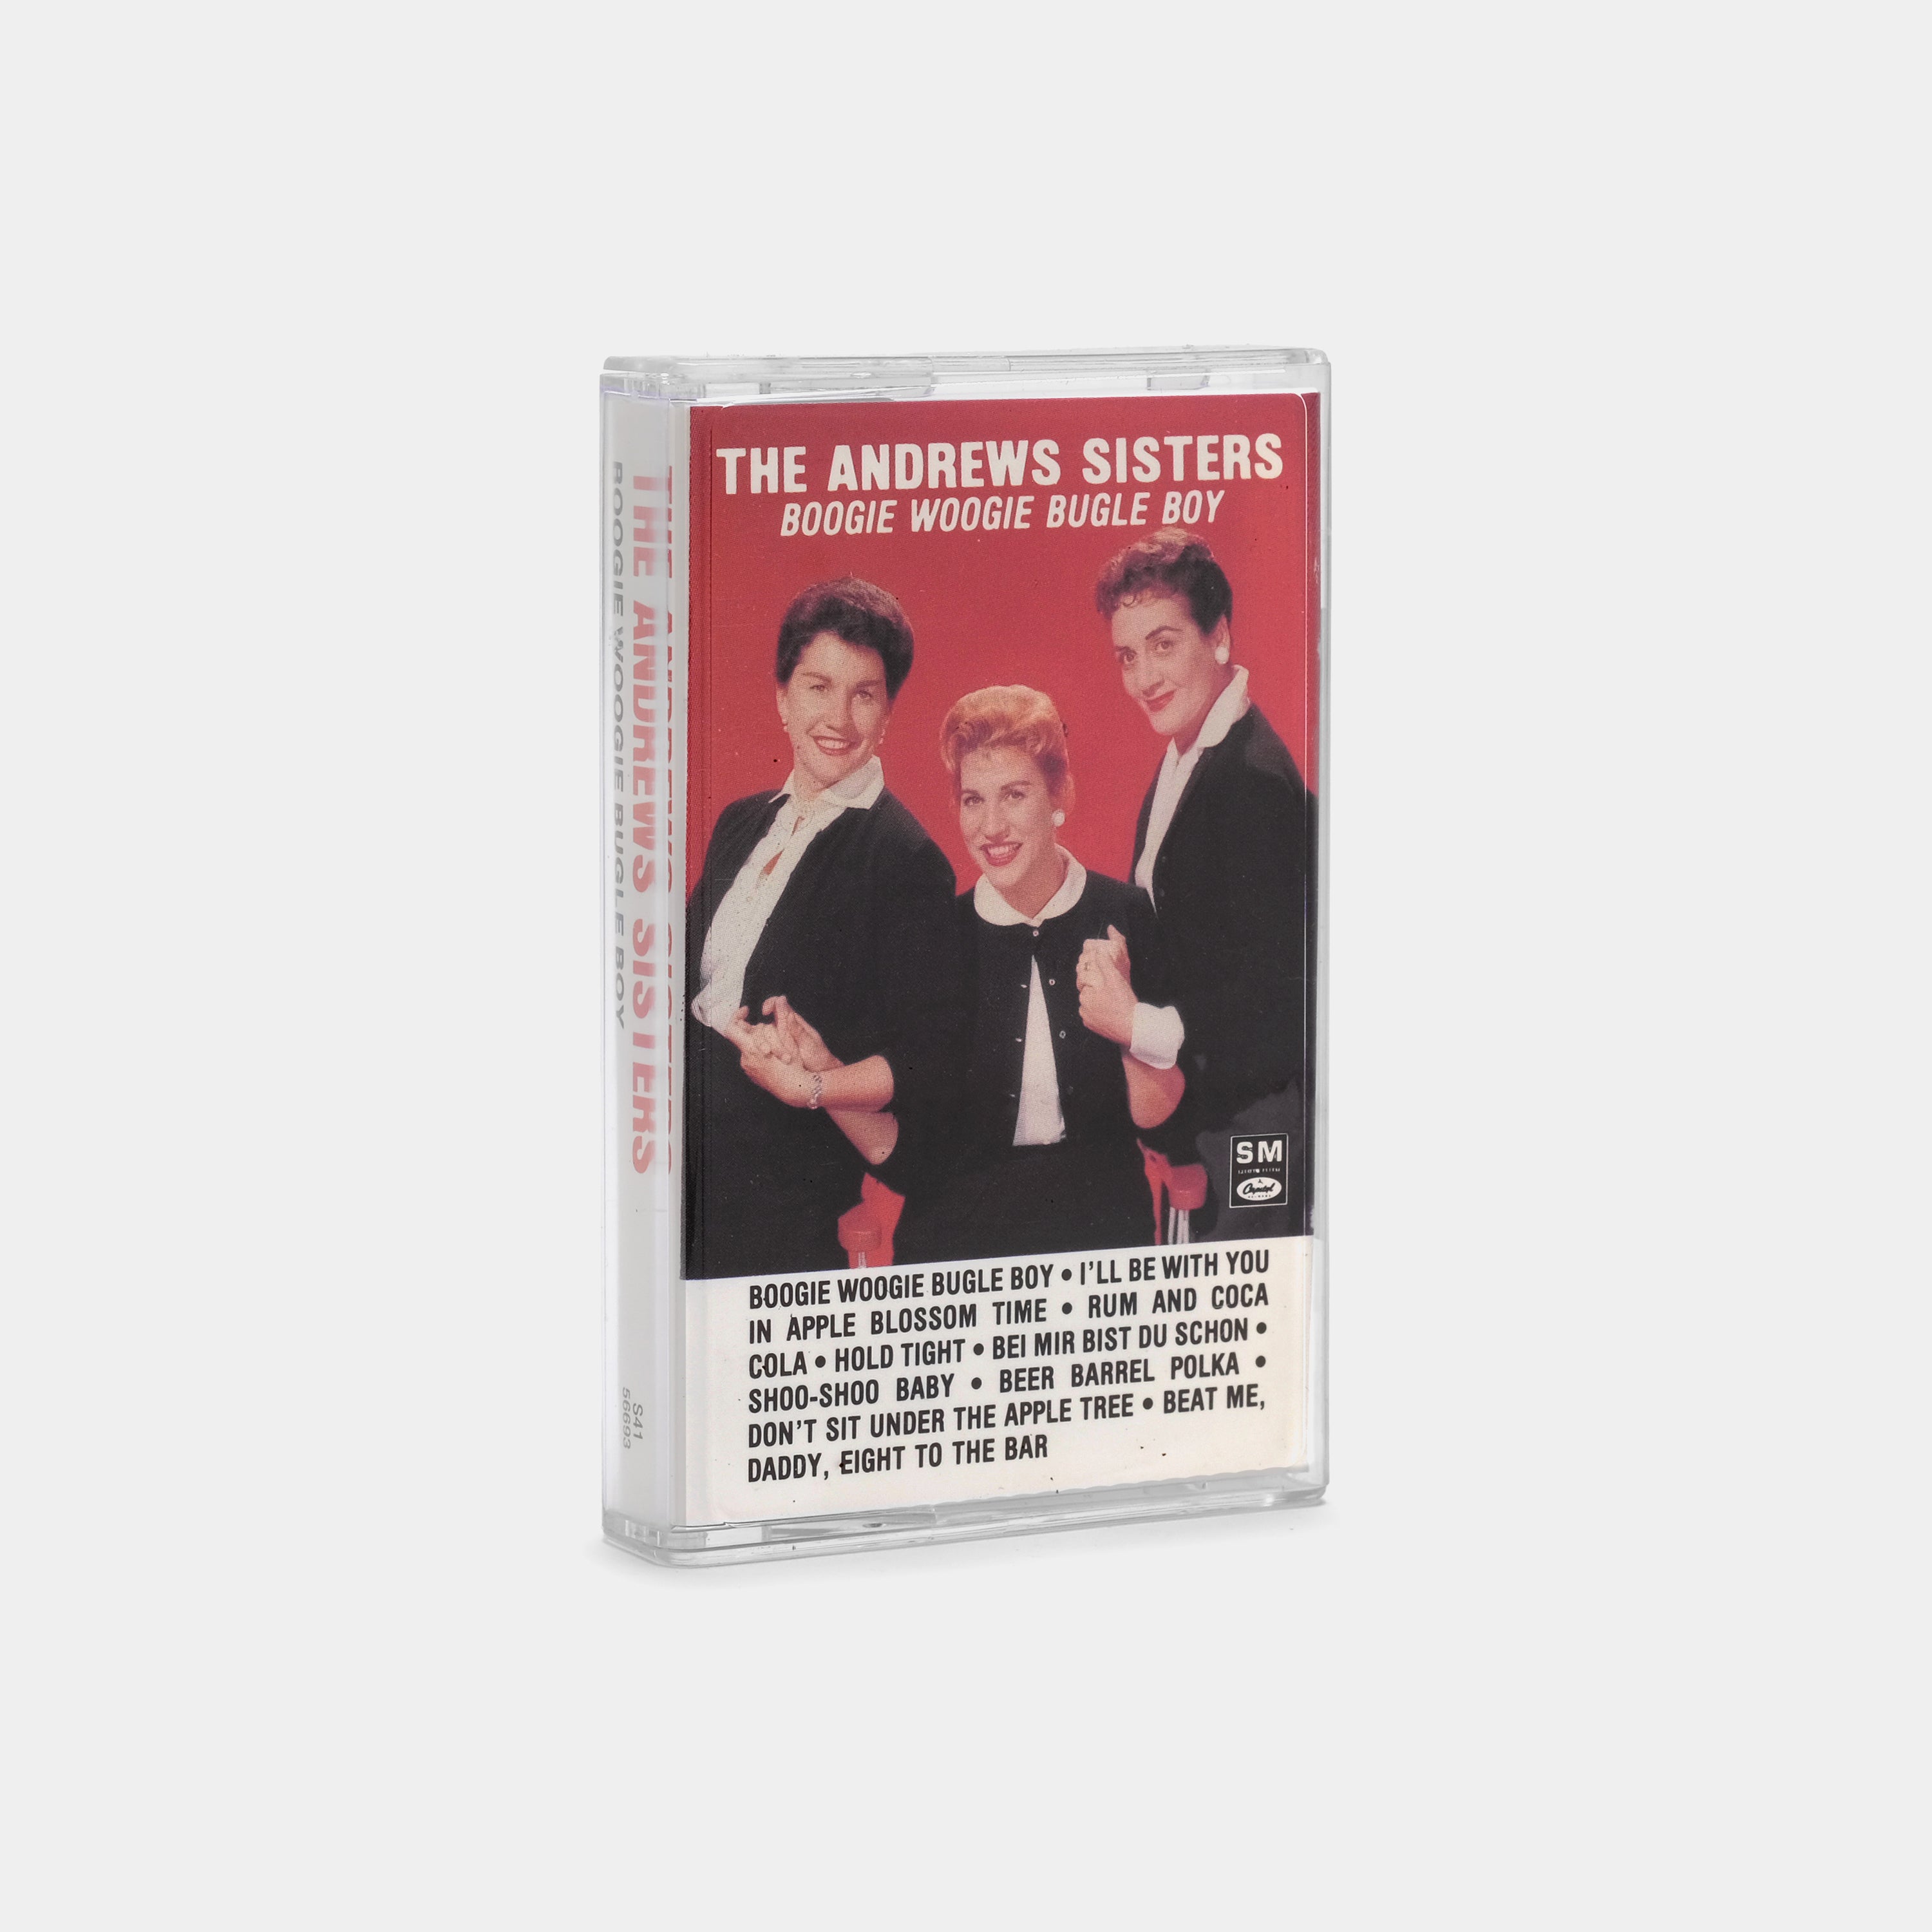 The Andrews Sisters - Boogie Woogie Bugle Boy Cassette Tape